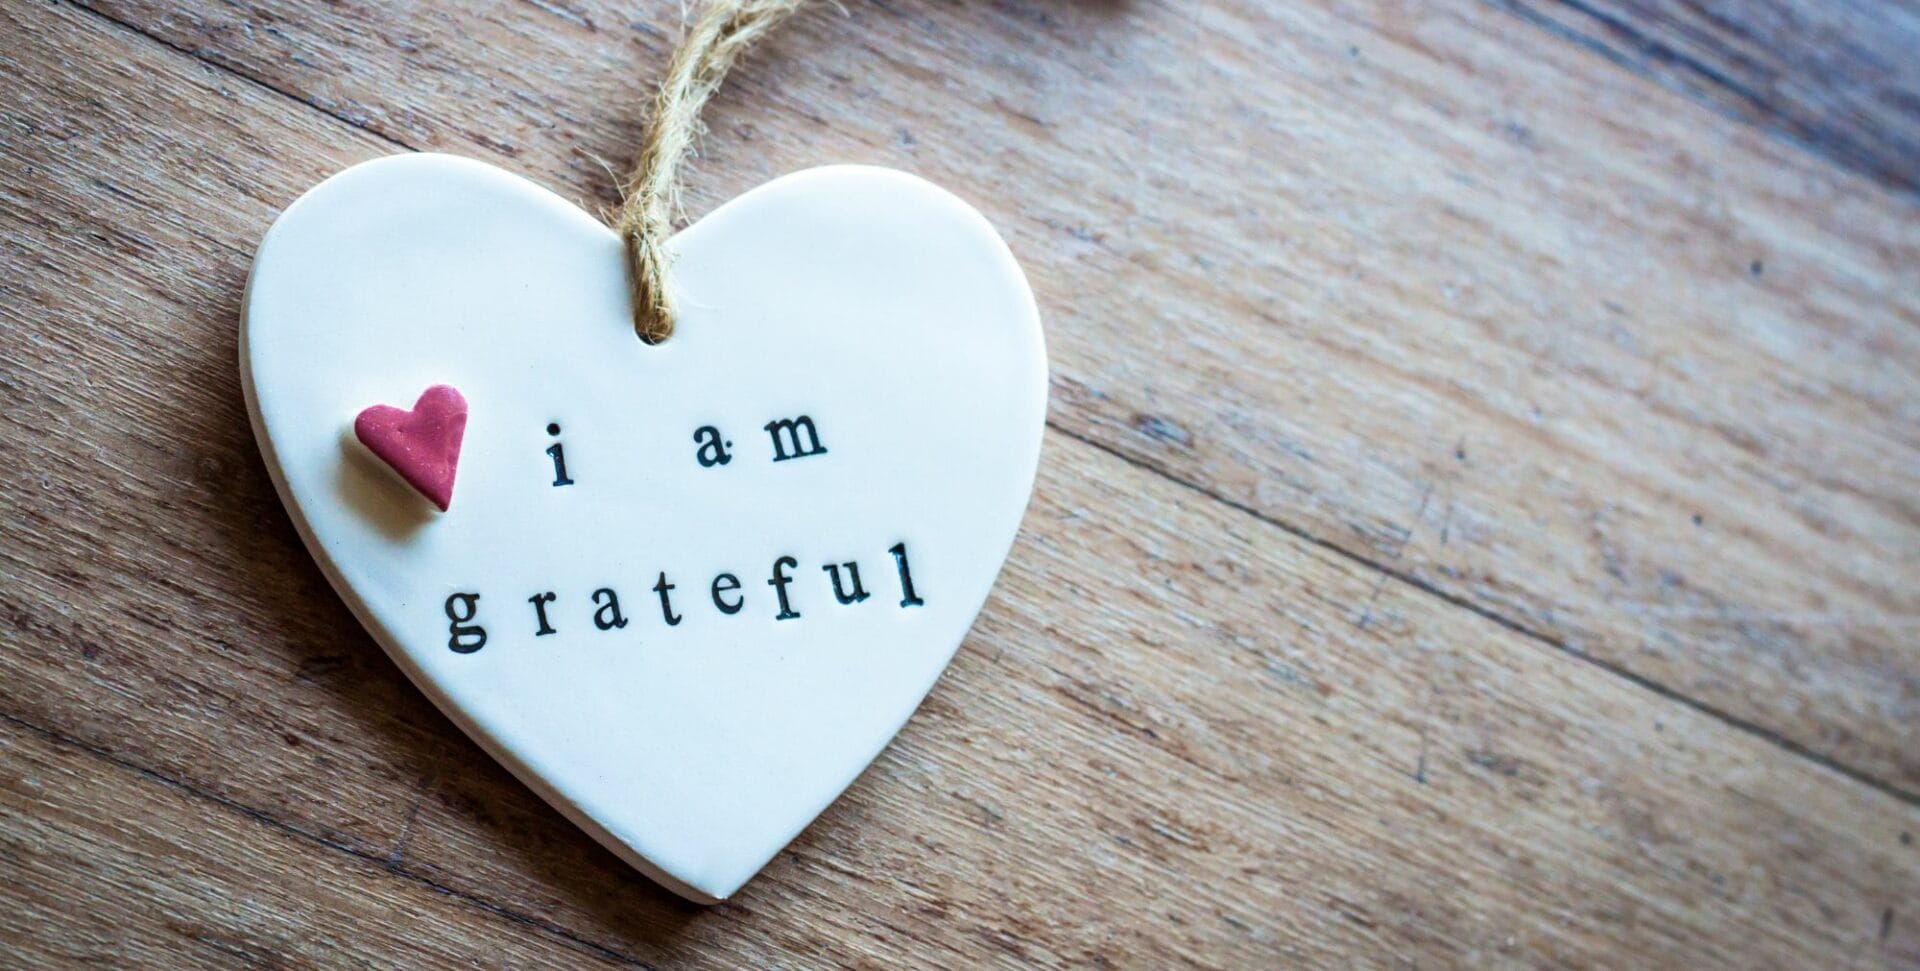 a heart shaped ornament with the words I am grateful written on it